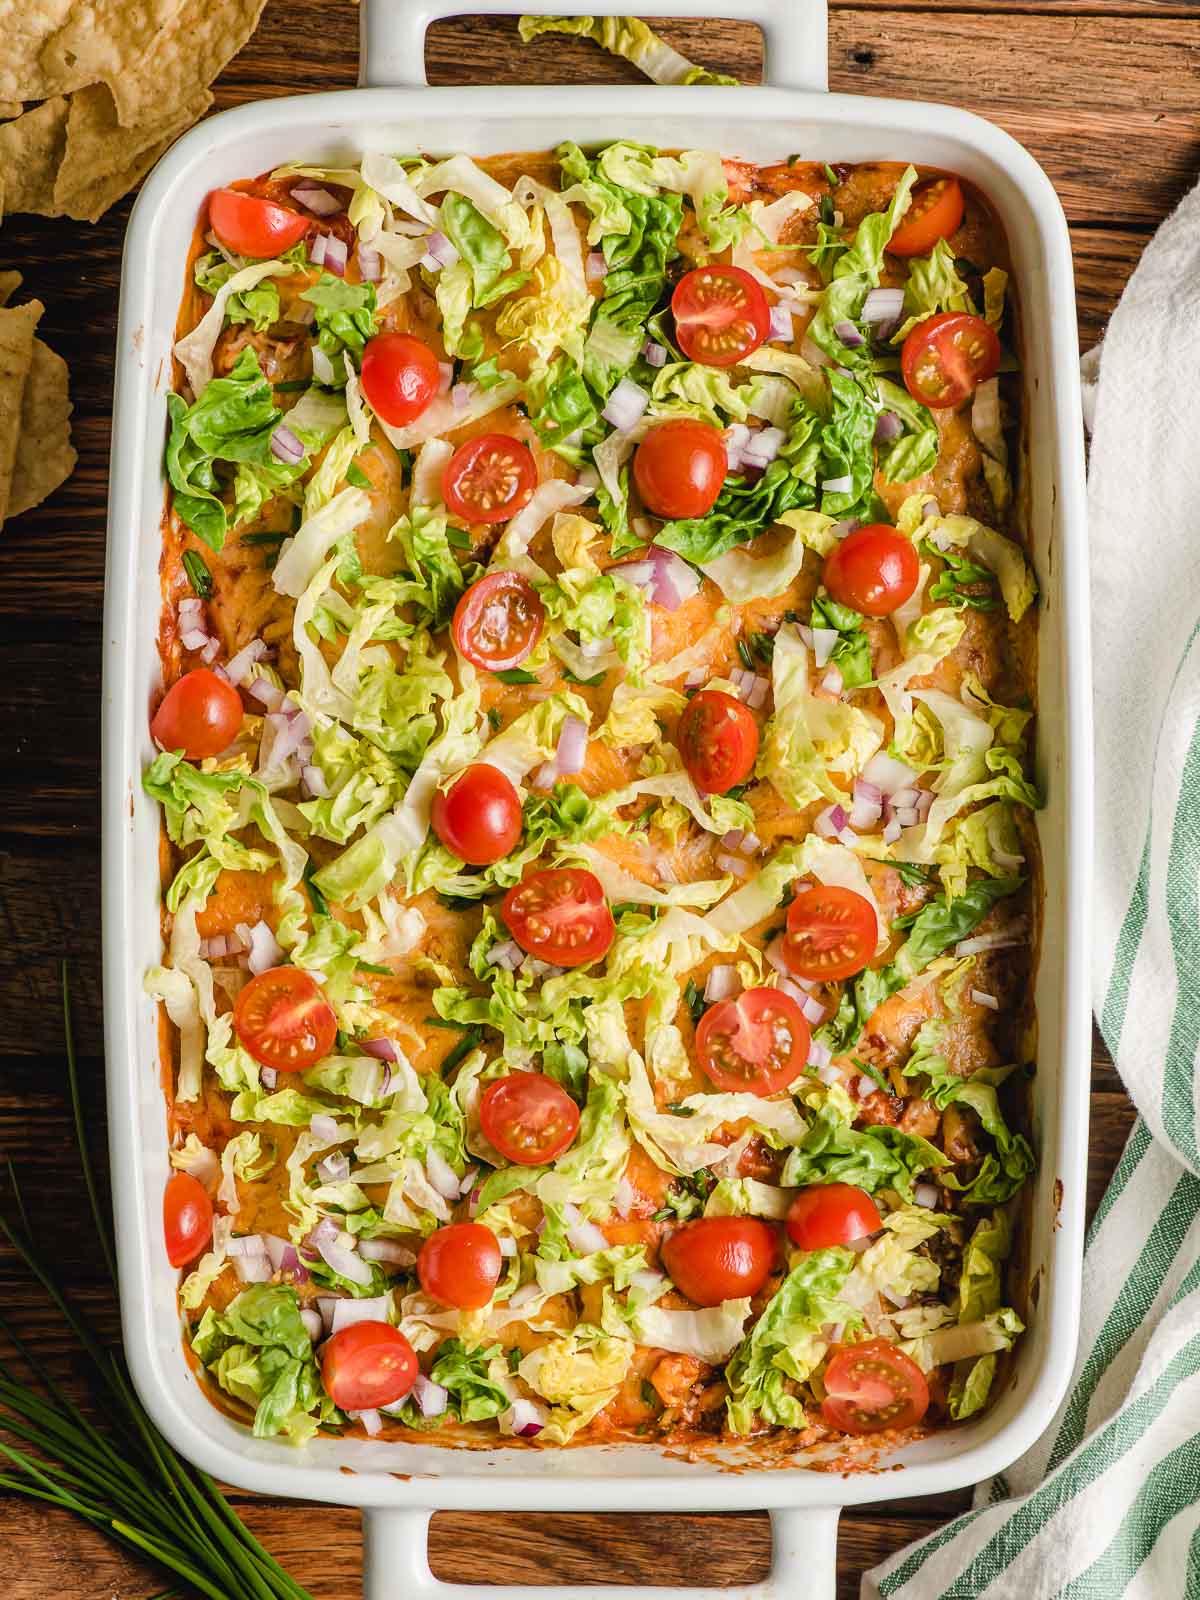 A serving dish filled with baked layered taco dip, topped with tomatos and lettuce